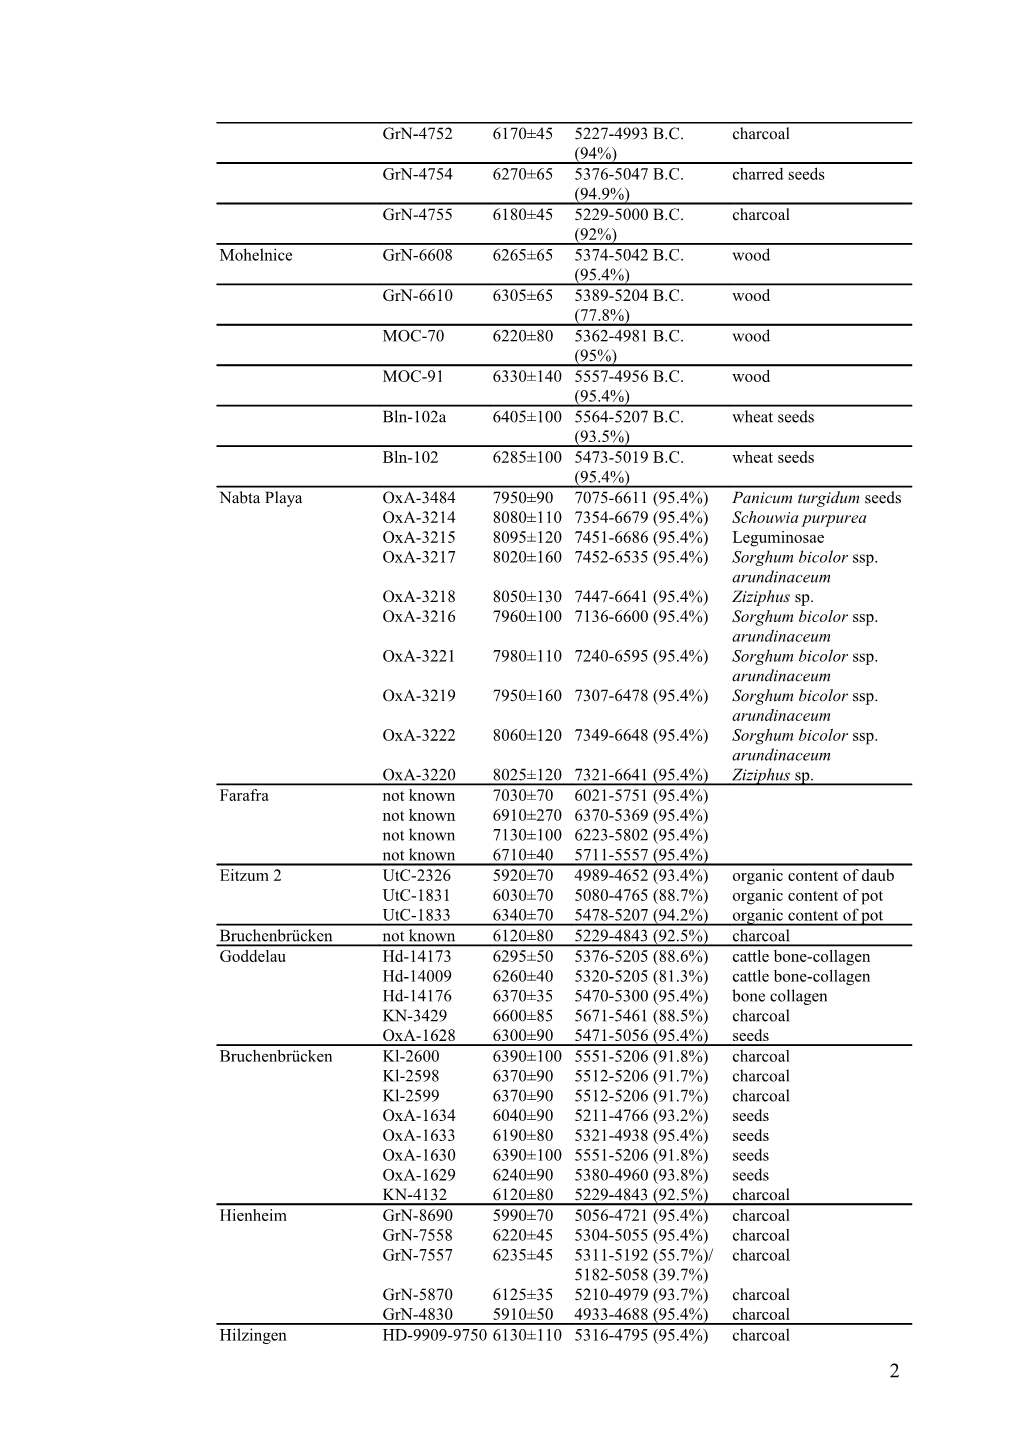 Table 3 Table of Radiocarbon Dates Associated with Pre-5000 Cal B